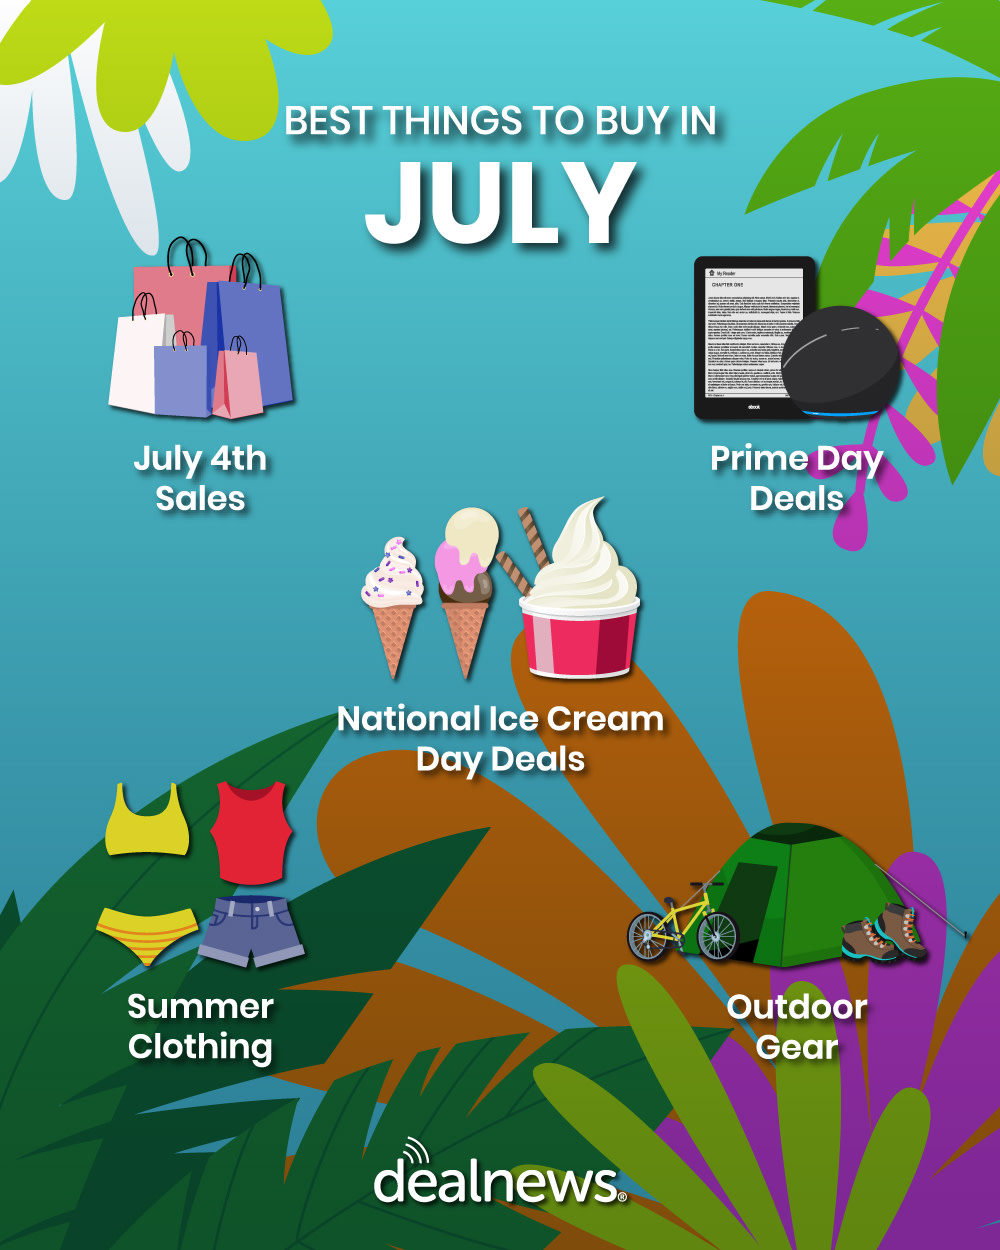 Five of the best things to buy in July depicted in an infographic.